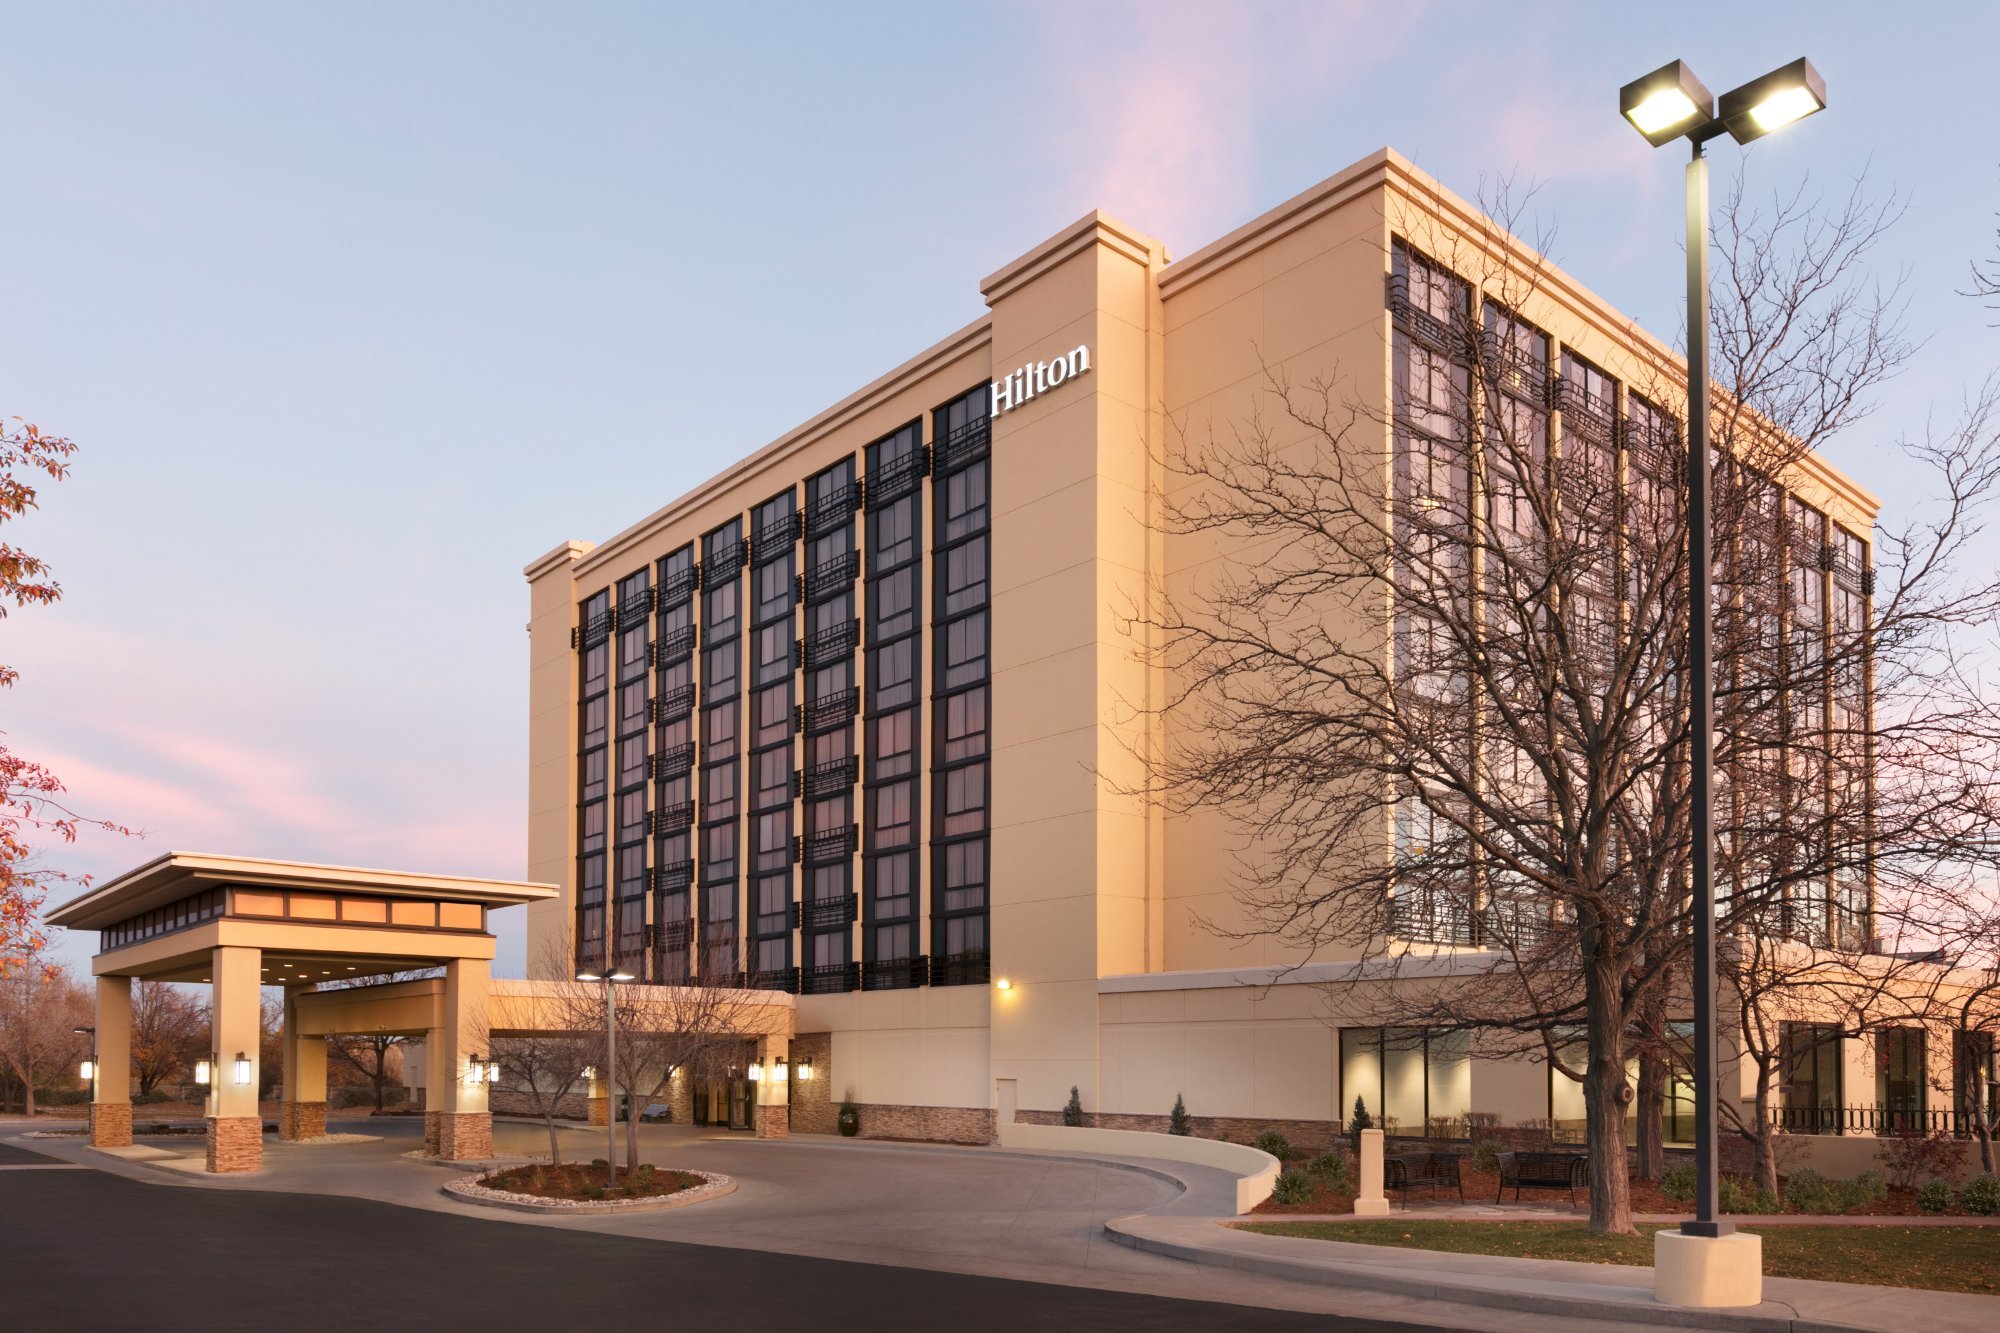 Photo of Fort Collins Hilton, Fort Collins, CO